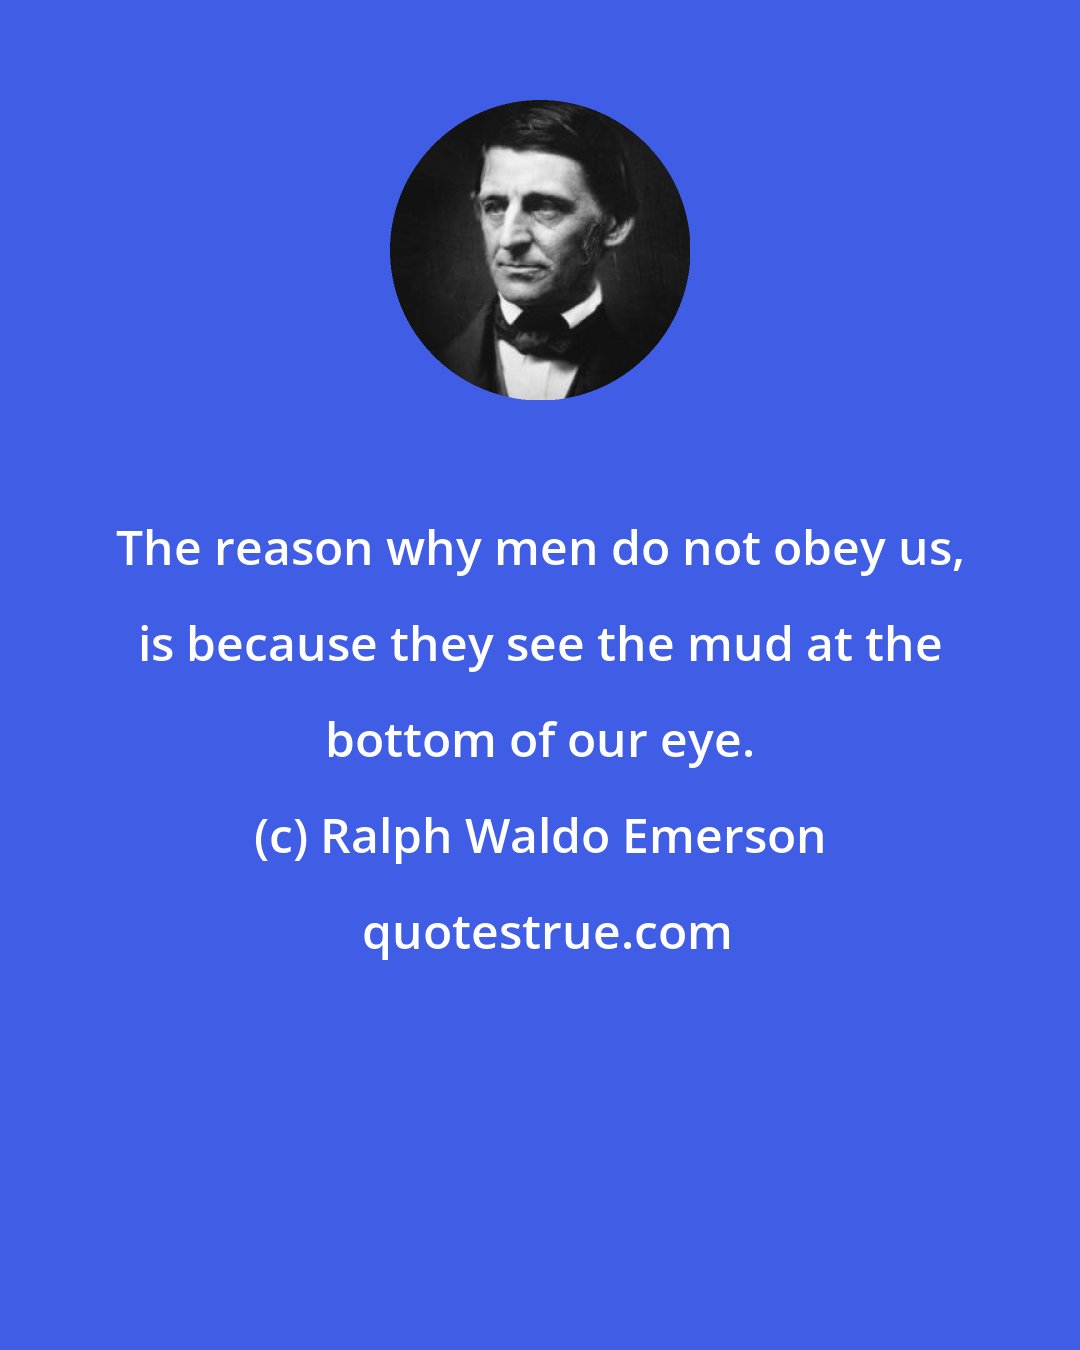 Ralph Waldo Emerson: The reason why men do not obey us, is because they see the mud at the bottom of our eye.